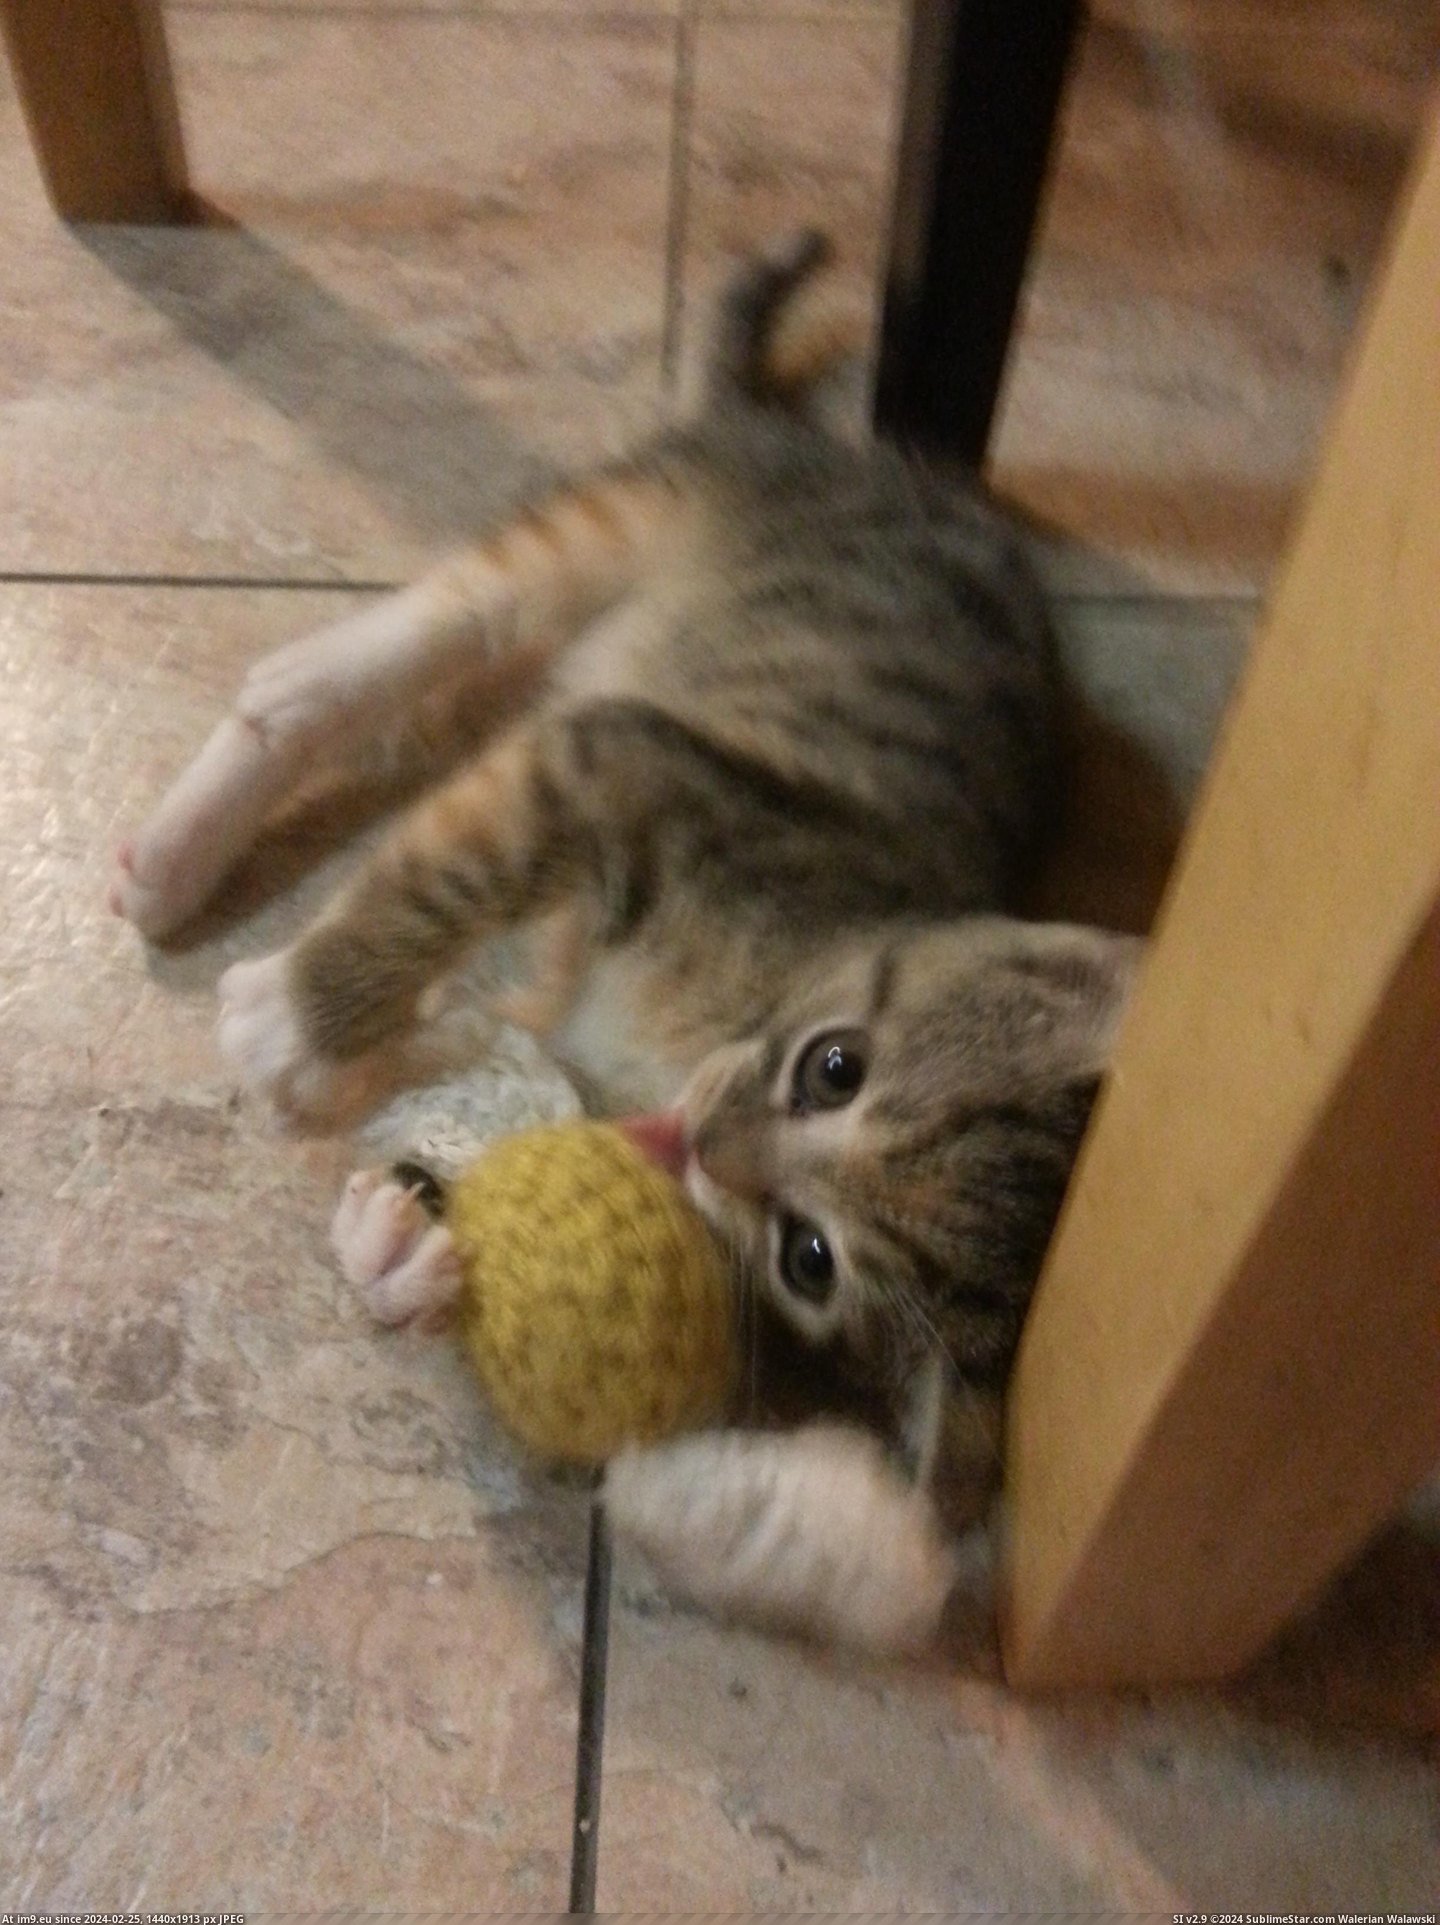 #Cats #Baby #Foster #Seeker #Snitch #Toy #Playing [Cats] This is my foster baby playing with her toy snitch. She's the best seeker I know. Pic. (Изображение из альбом My r/CATS favs))